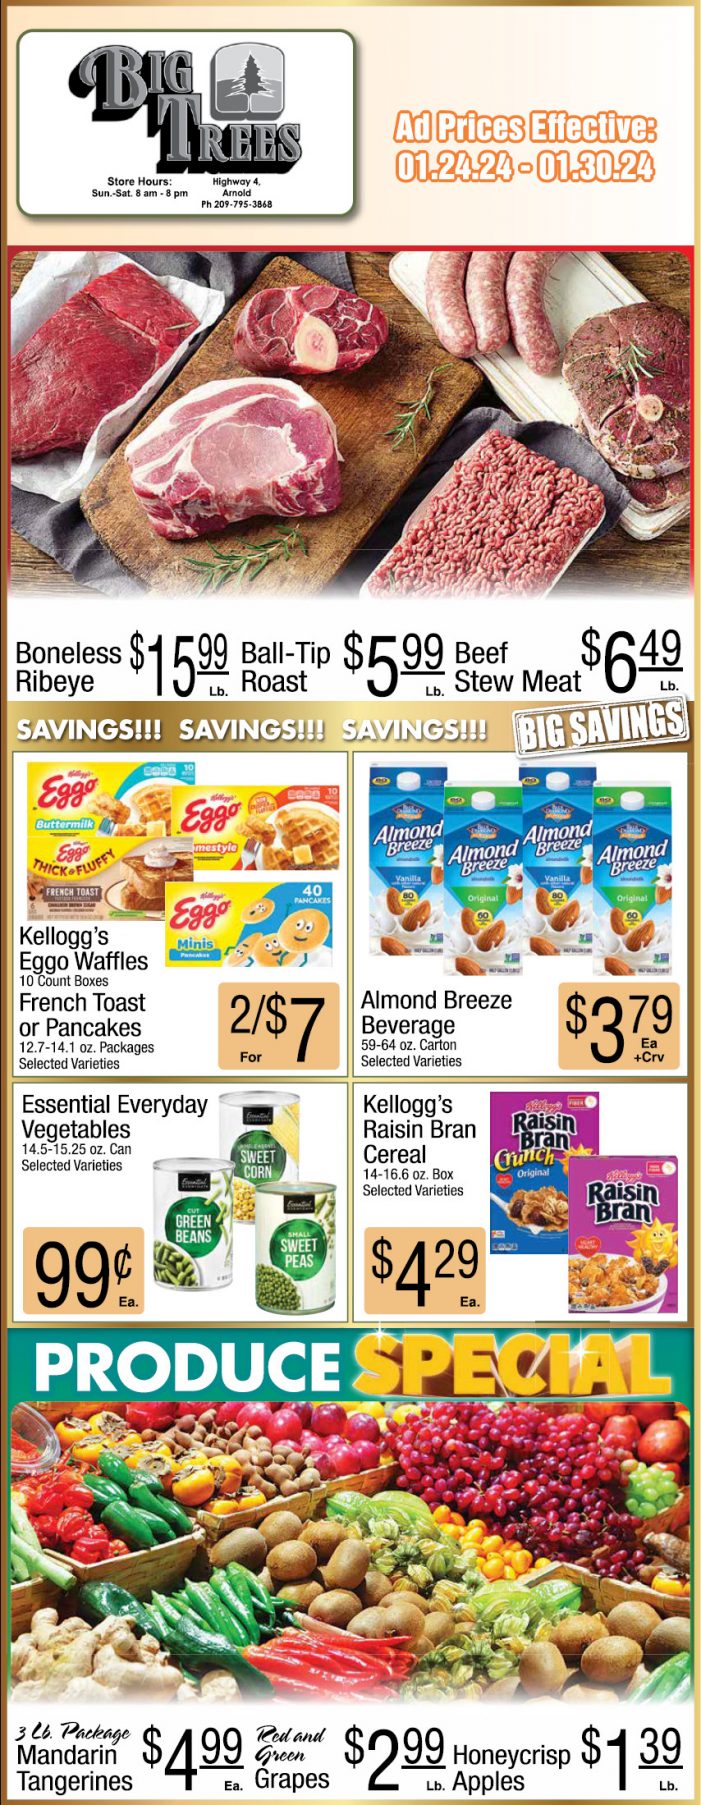 Big Trees Market Weekly Ad, Grocery, Produce, Meat & Deli Specials Through January 30th! Shop Local & Save!